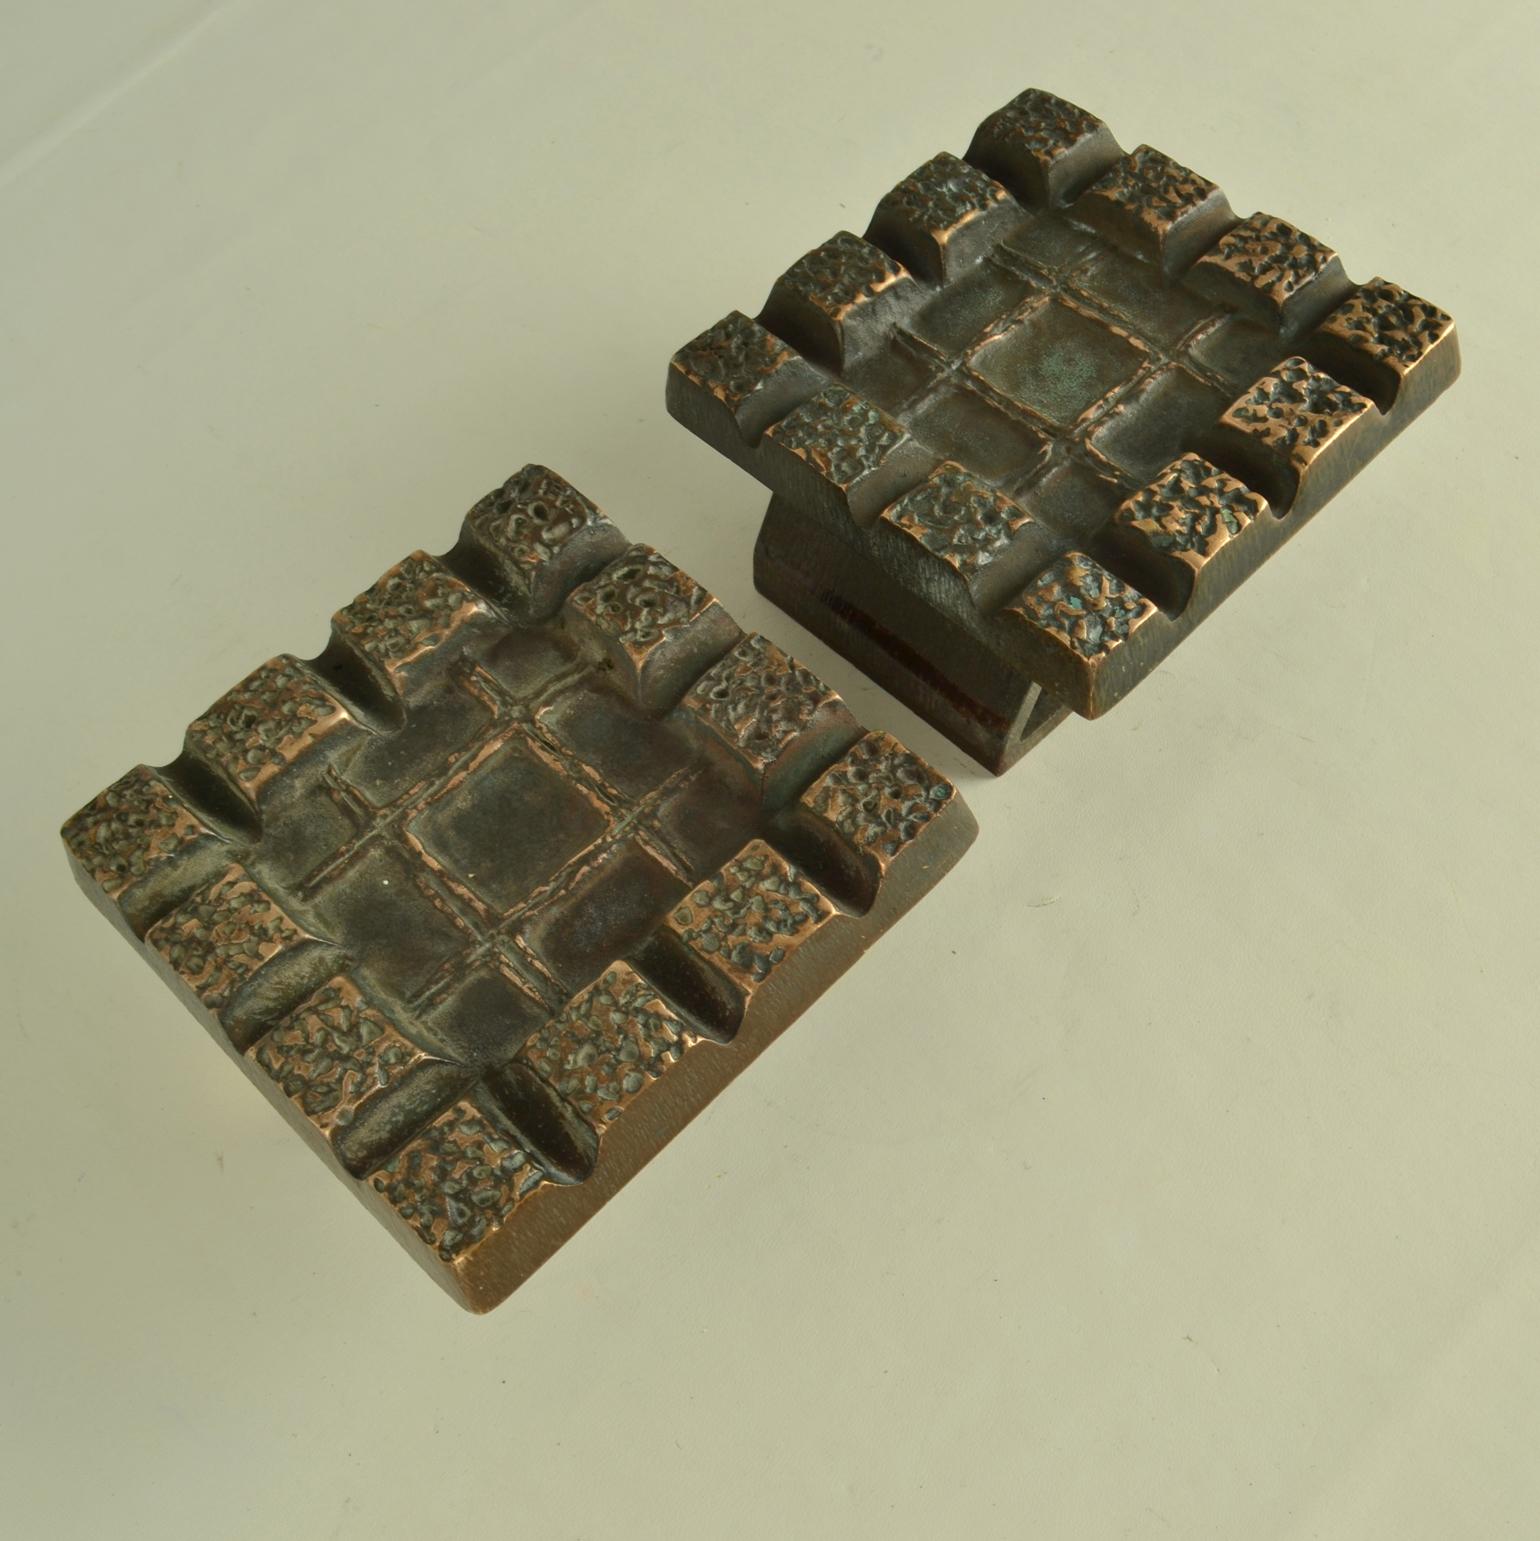 Brutalist pair of bronze relief with strong relief and geometric pattern with repetition of squares is made in the 1960-70's. These heavy pieces, made of cast bronze are in perfect condition. The bronze is oyidized, creating a strong patina to the